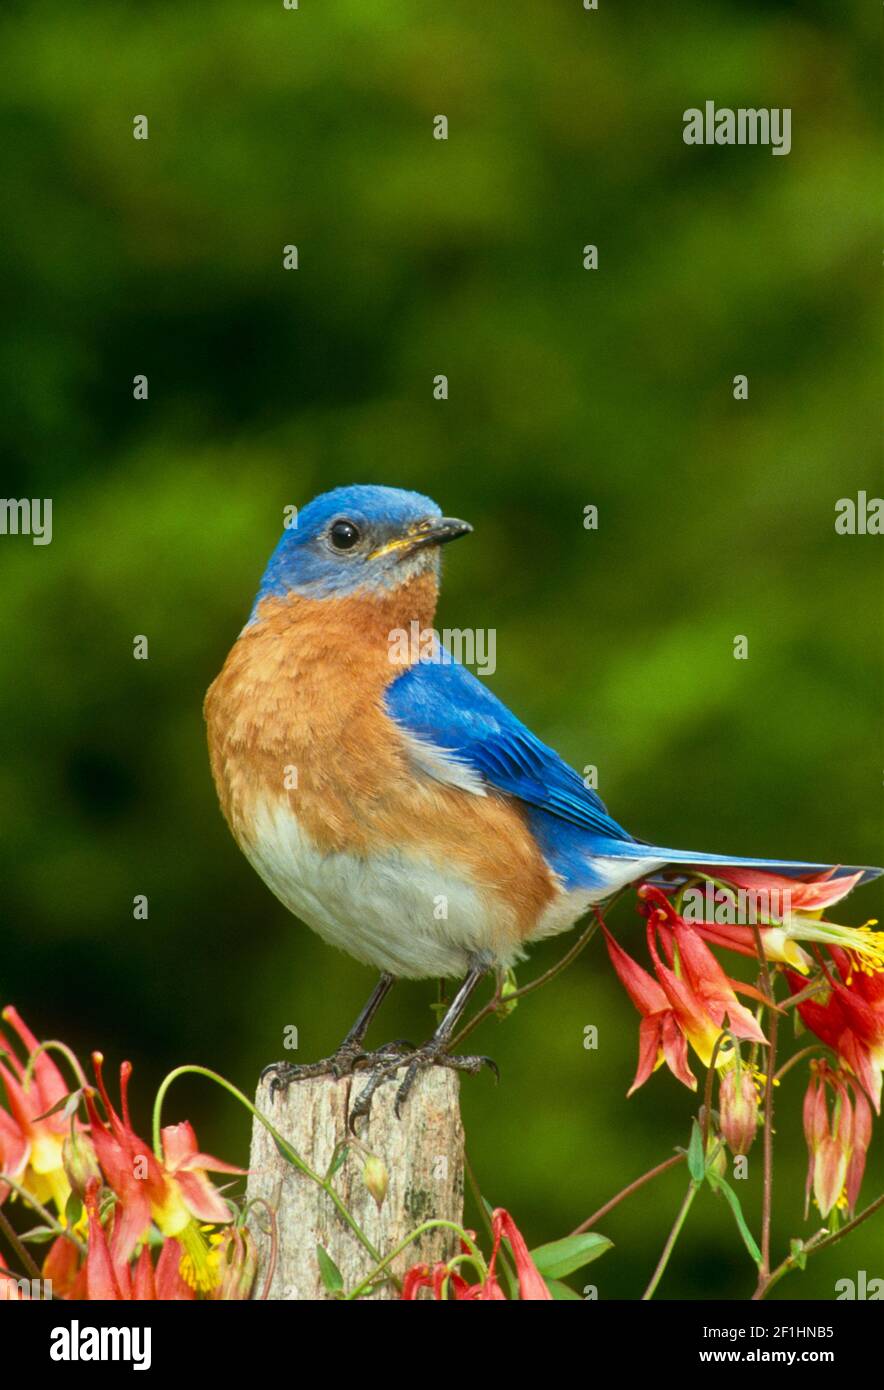 A Bluebird, Sialia sialis, on a fencepost, among blooming Columbine flowers, in the summer garden with a brown caterpillar in mouth, USA Stock Photo